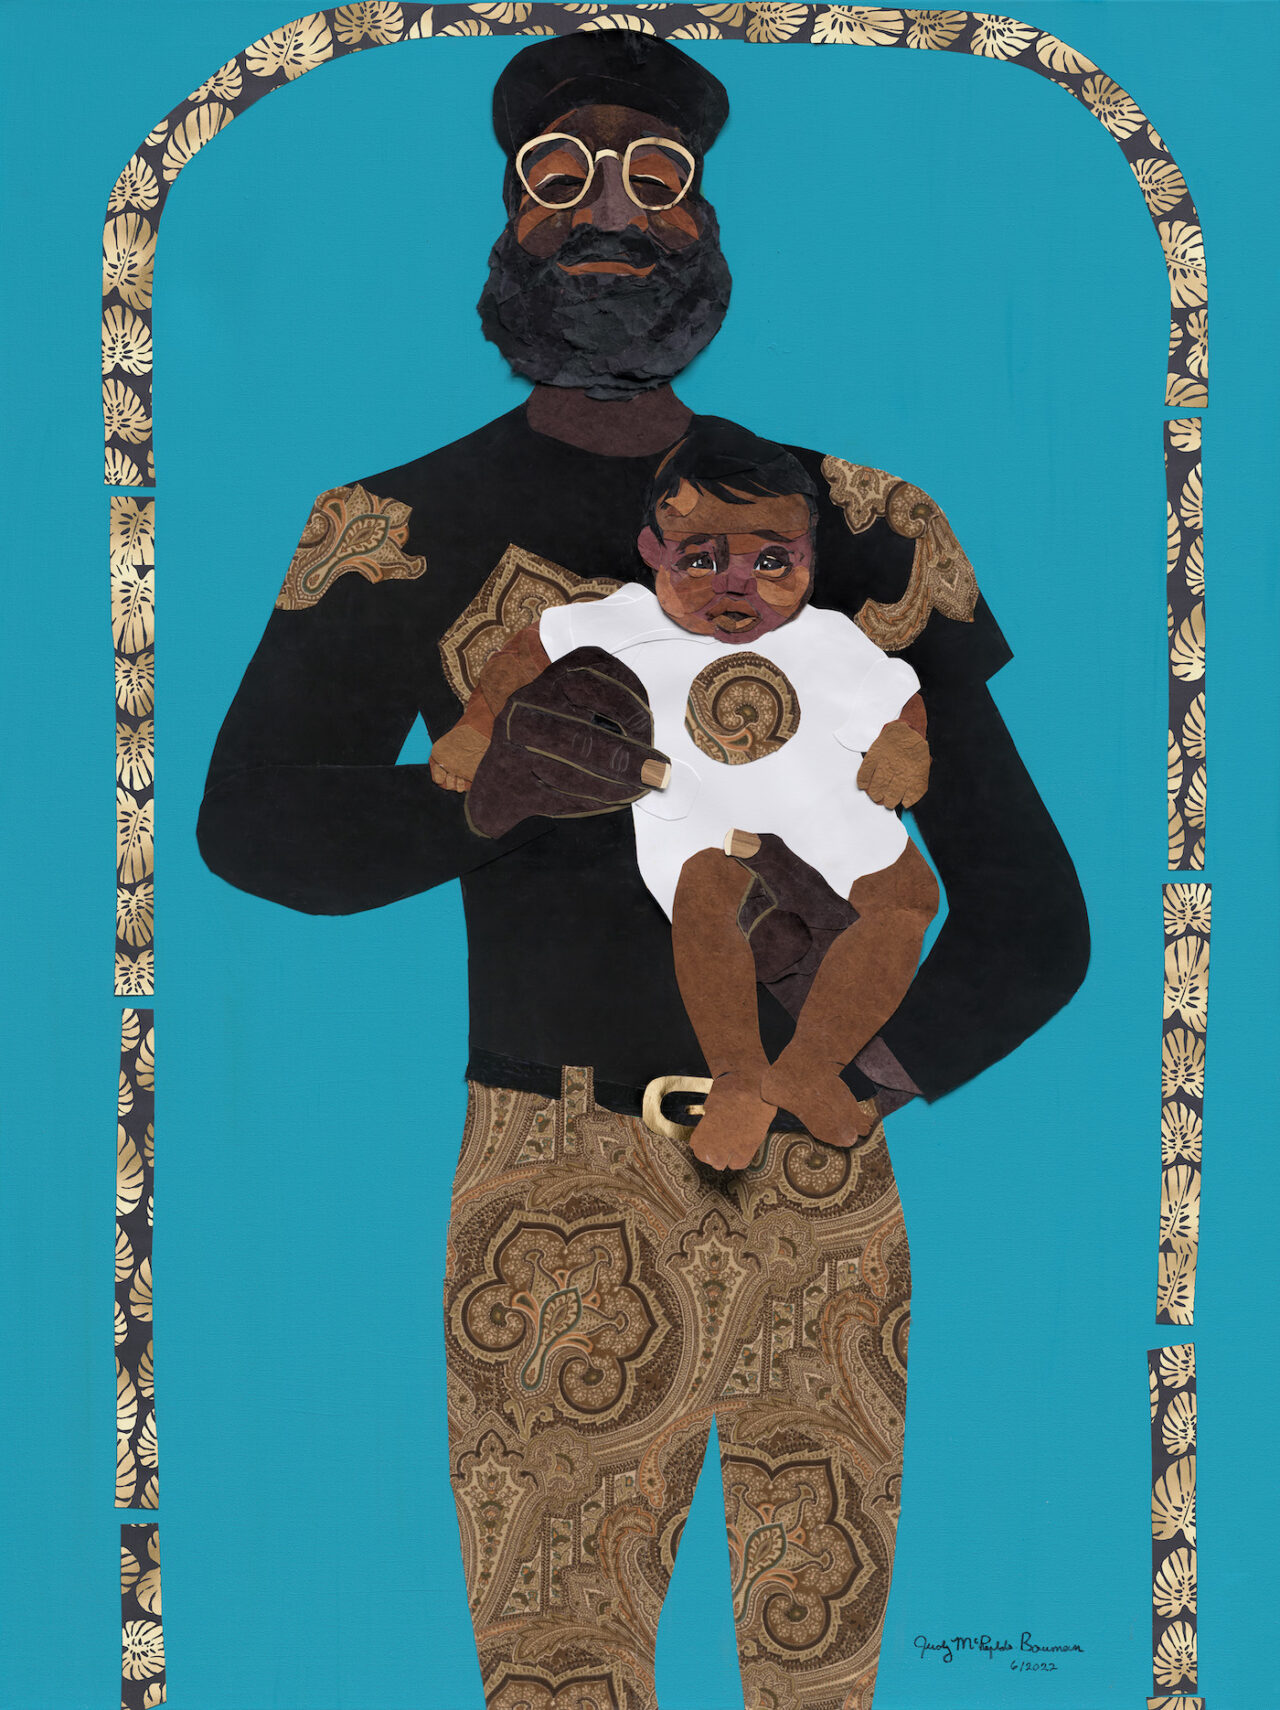 Judy Bowman, Proud Papa, 2022. Mixed media
collage on canvas 48 x 36 in 121.9 x
91.4 cm. Image courtesy the artist
and Museum of Contemporary Art Detroit
